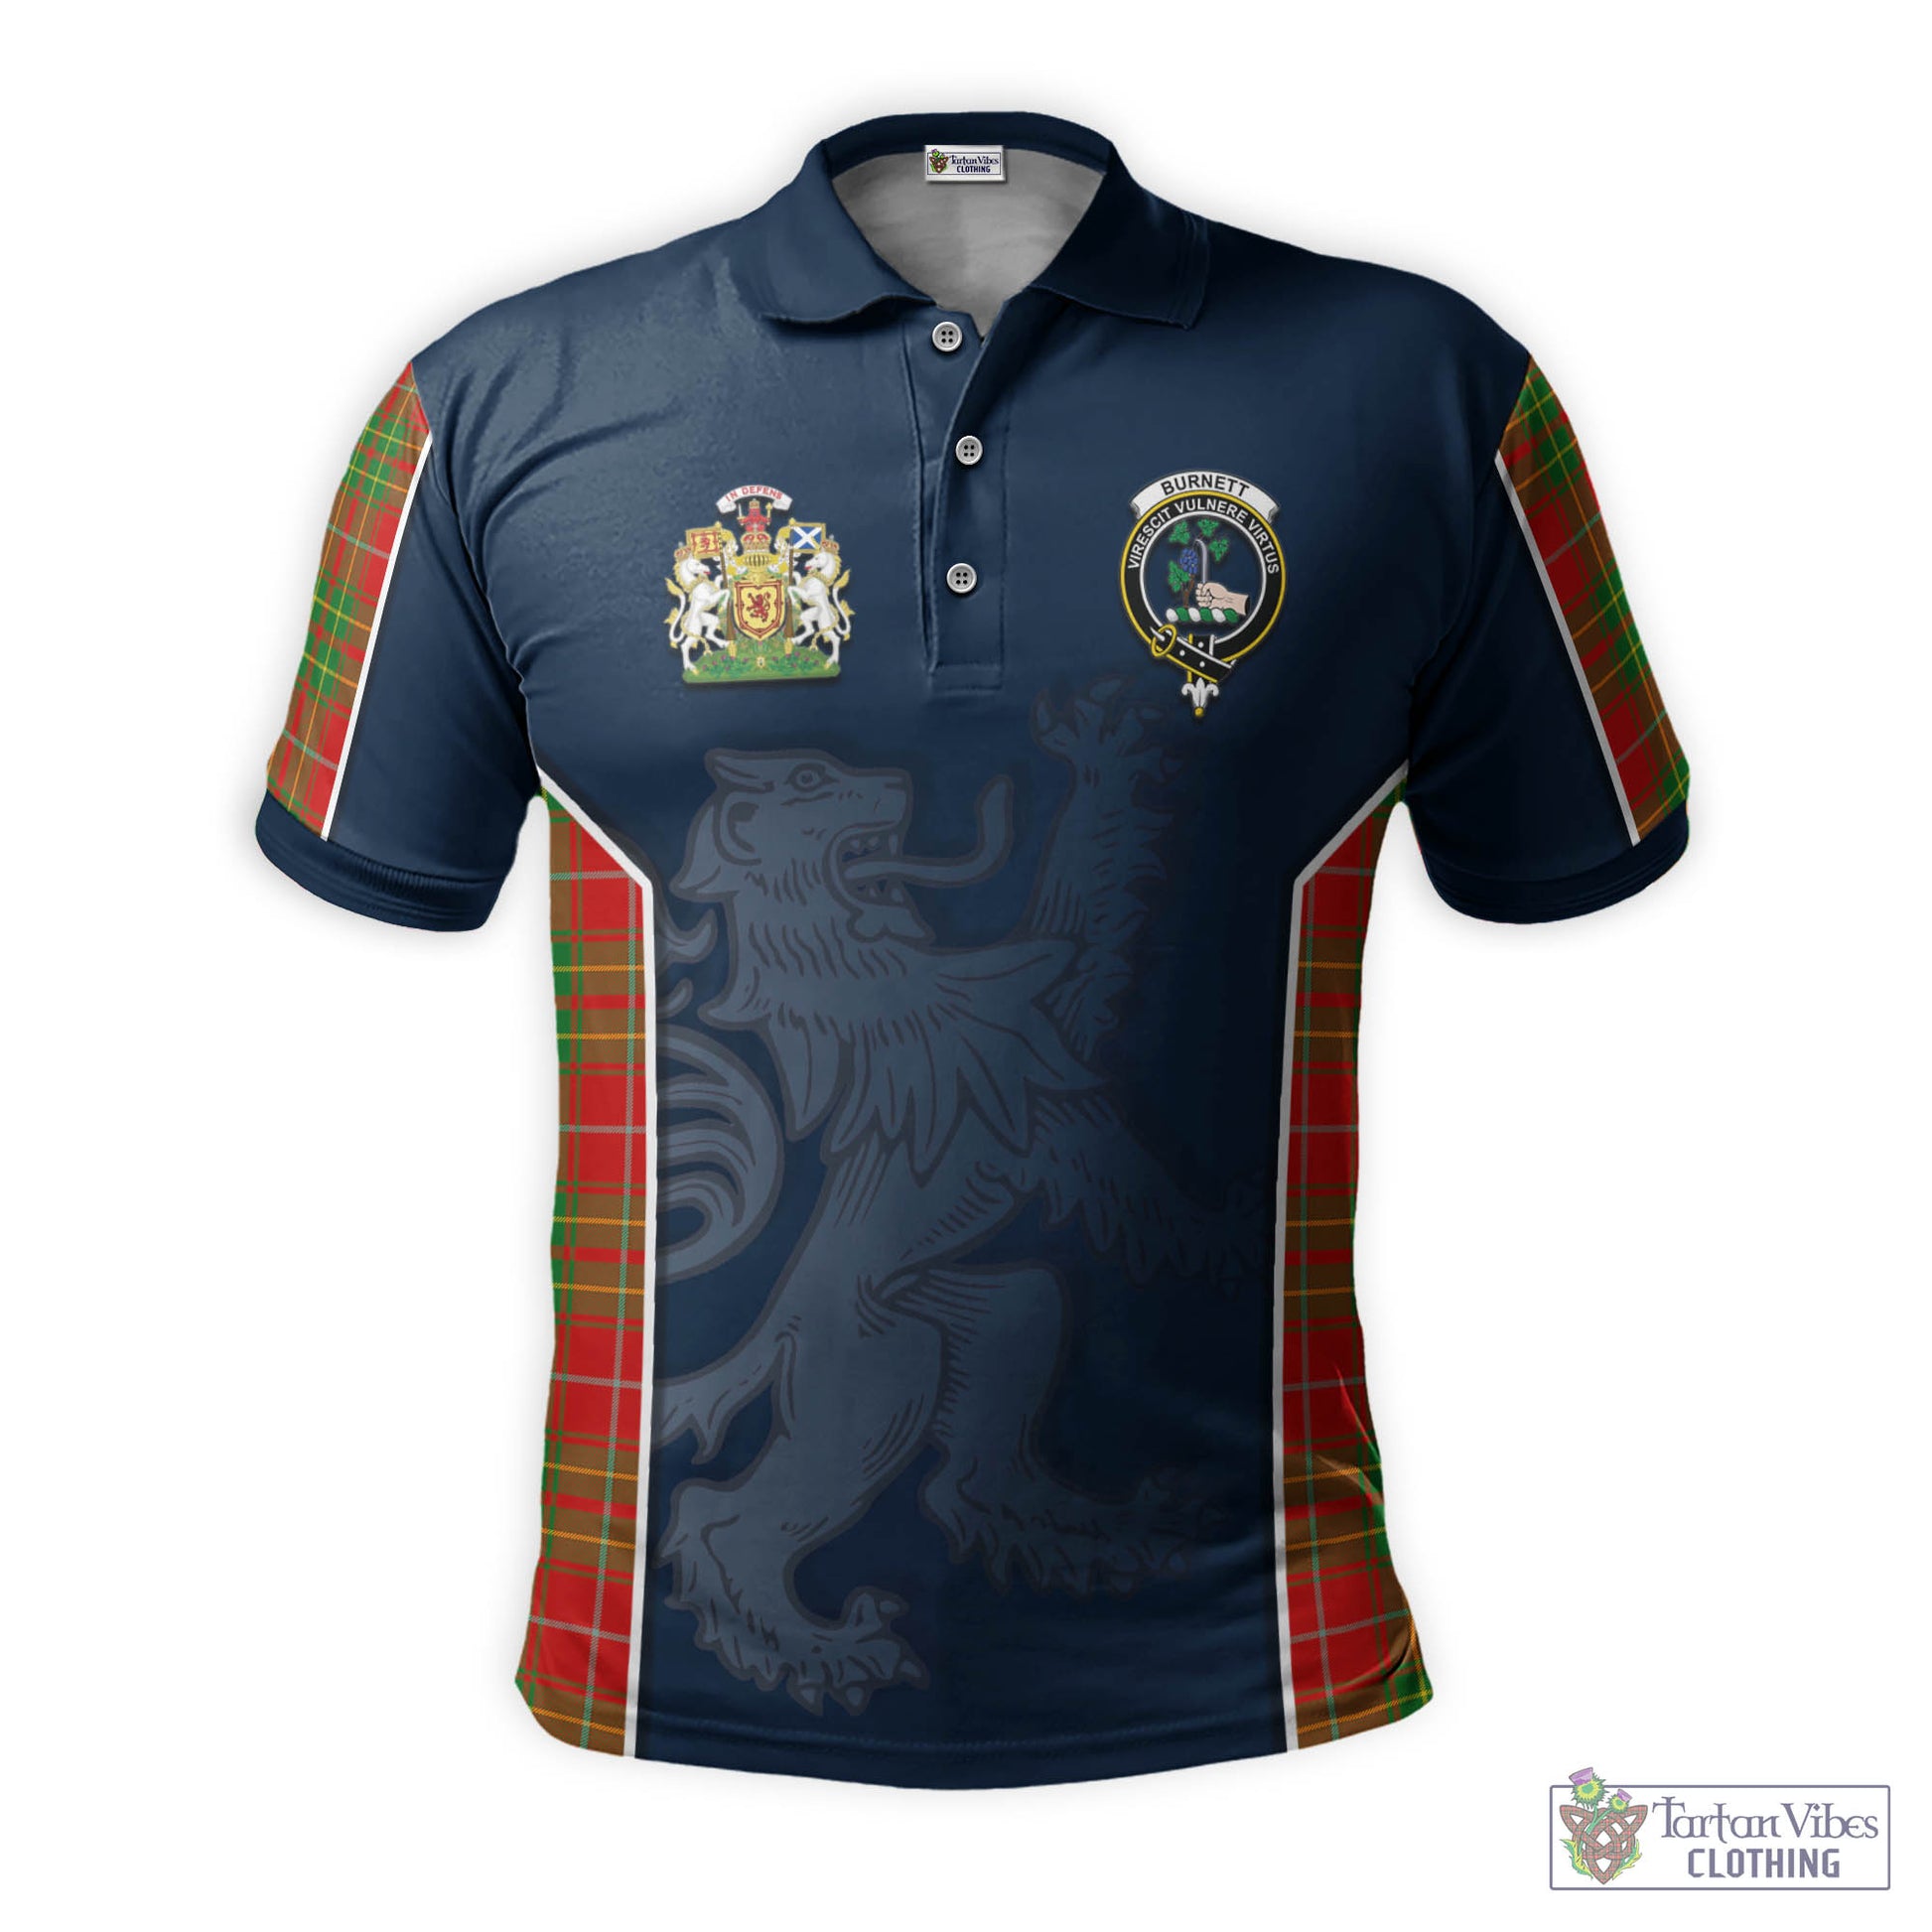 Tartan Vibes Clothing Burnett Ancient Tartan Men's Polo Shirt with Family Crest and Lion Rampant Vibes Sport Style